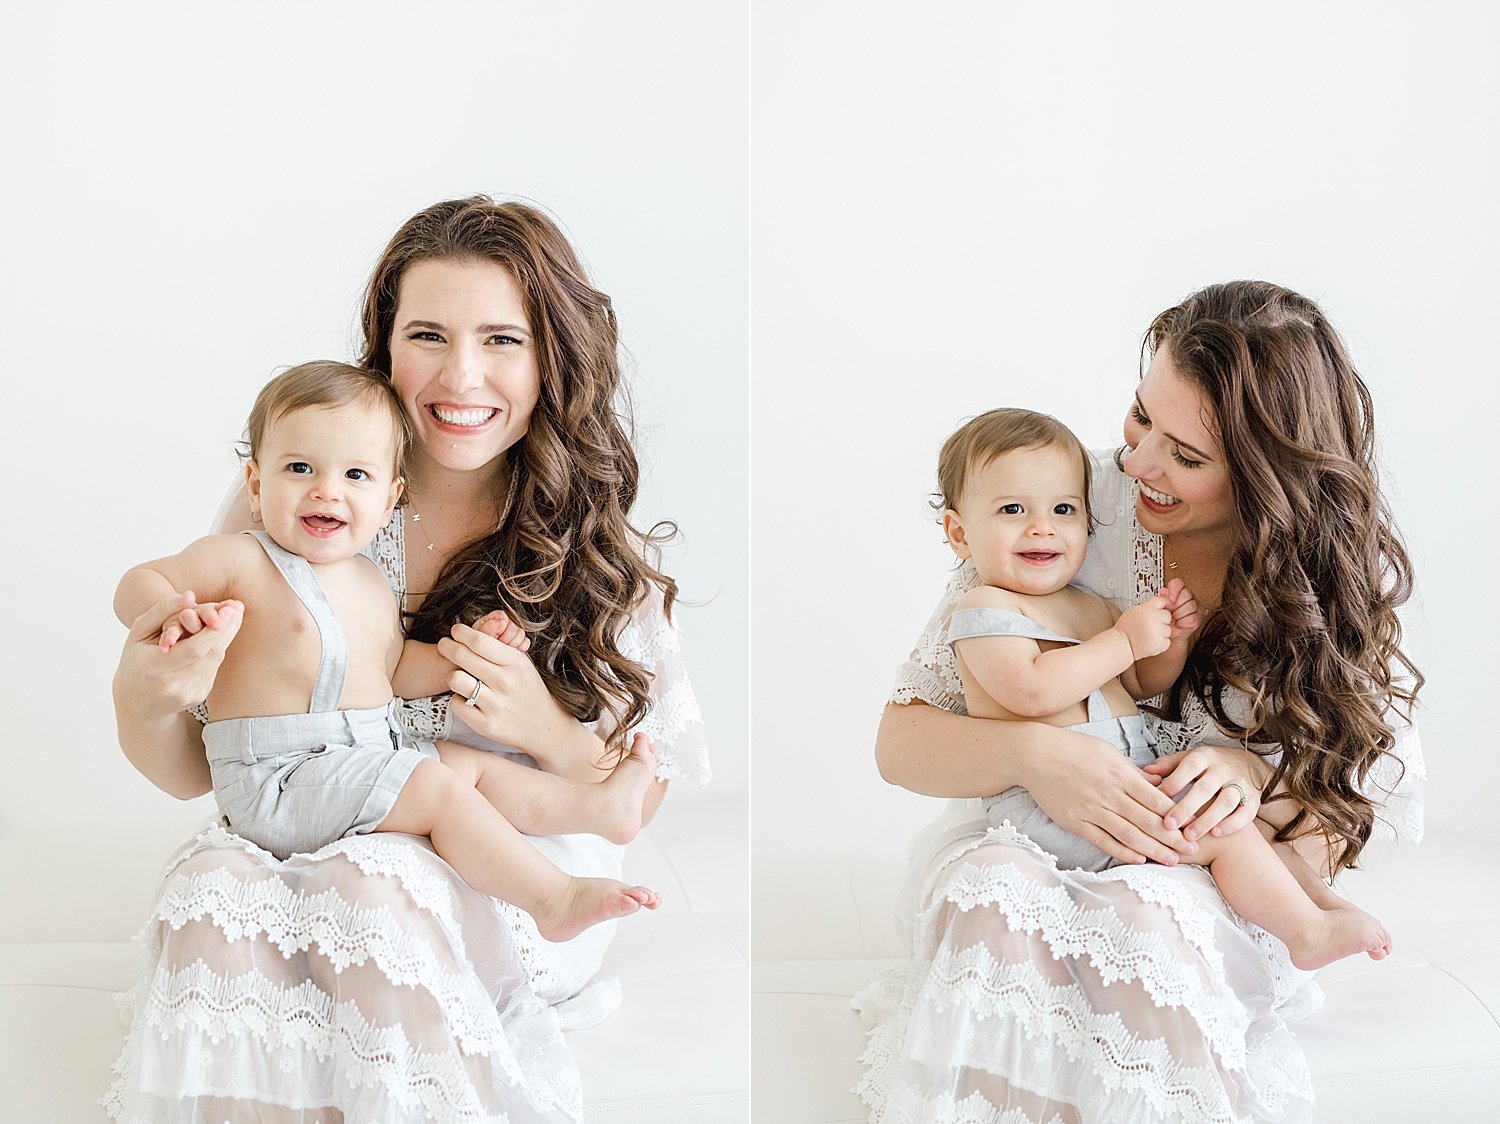 Why You Should Hire a Photographer for Your Baby's First Year | Mom with son during first birthday photoshoot | Kristin Wood Photography